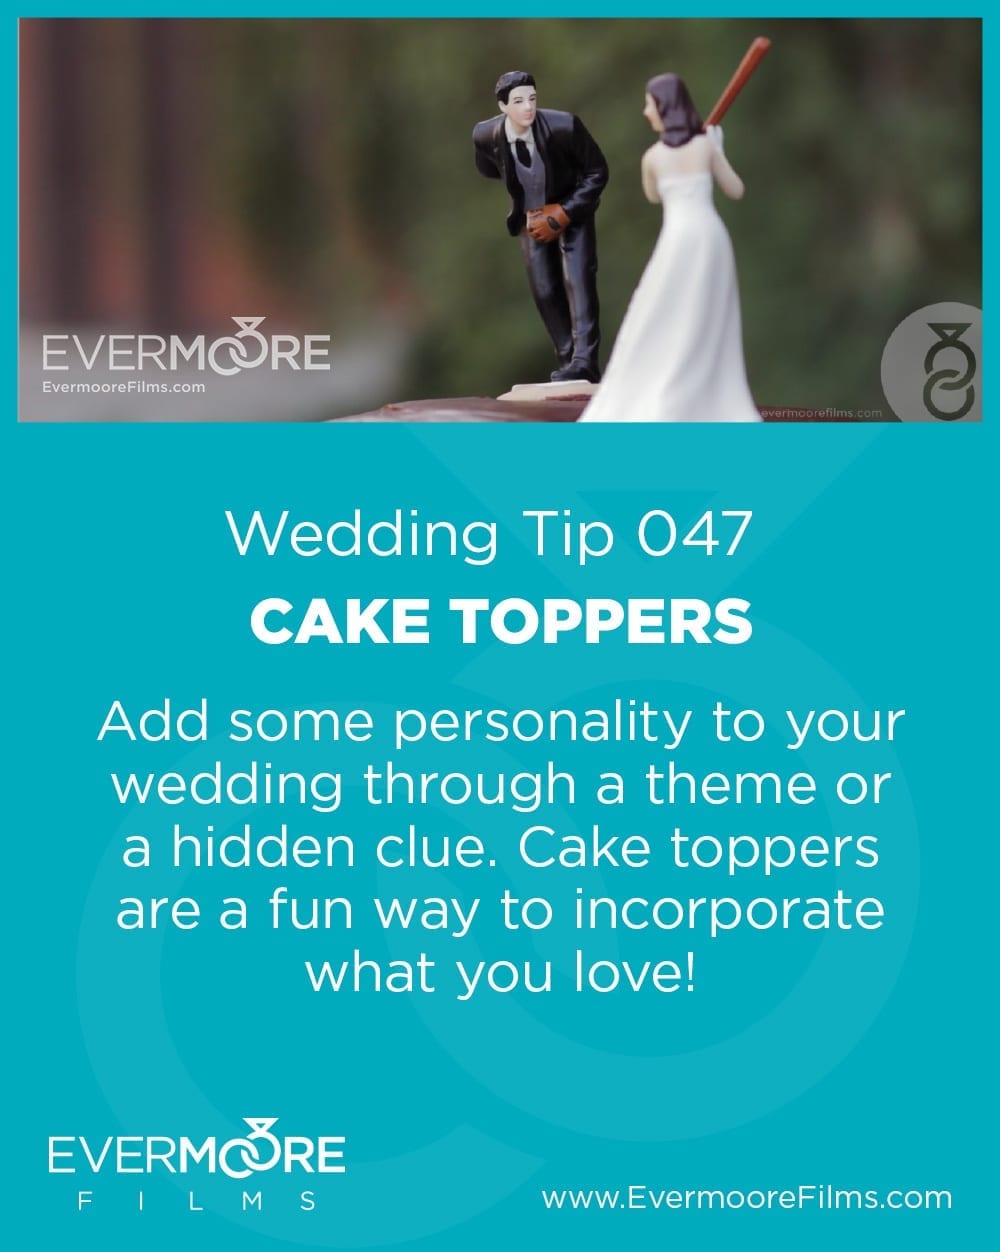 Cake Toppers | Wedding Tip 047 | Evermoore Films | Add some personality to your wedding through a theme or a hidden clue. Cake toppers are a fun way to incorporate what you love.